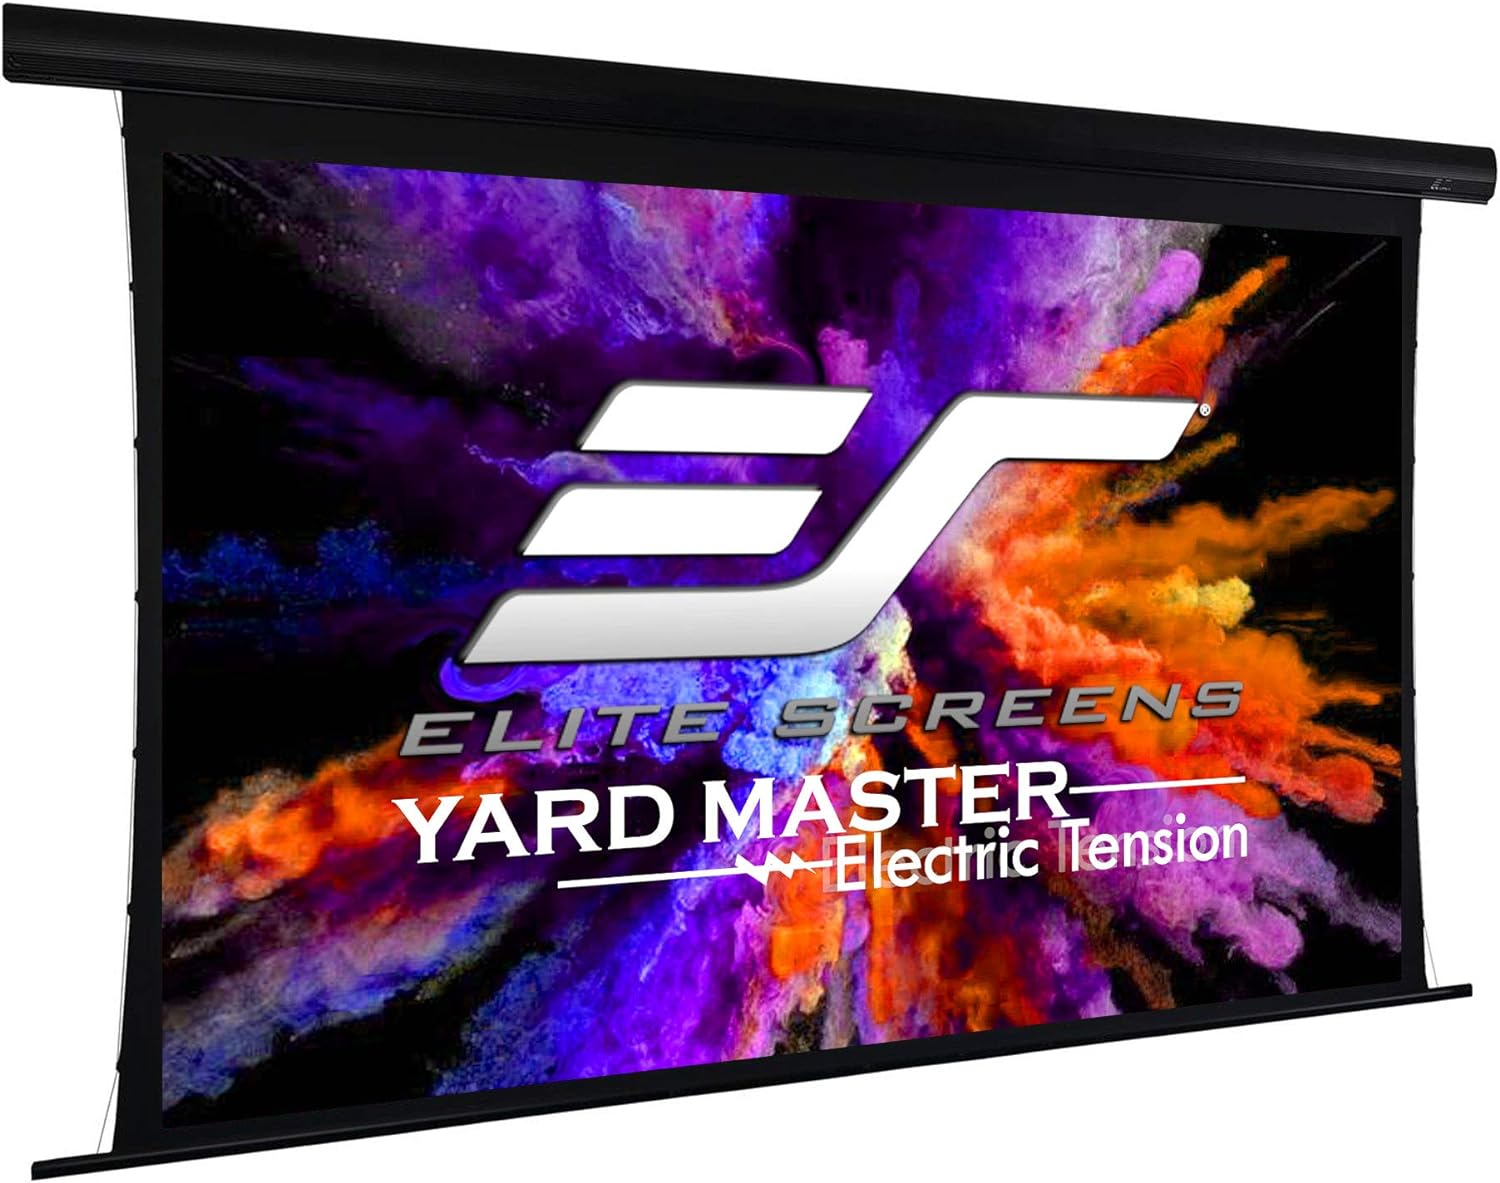 Elite Screens Yard Master Tension 135" Diag. 16:9, Electric Outdoor Tab-Tensioned DUAL Front Rear Projection Screen, OMS135HT-ELECTRODUAL